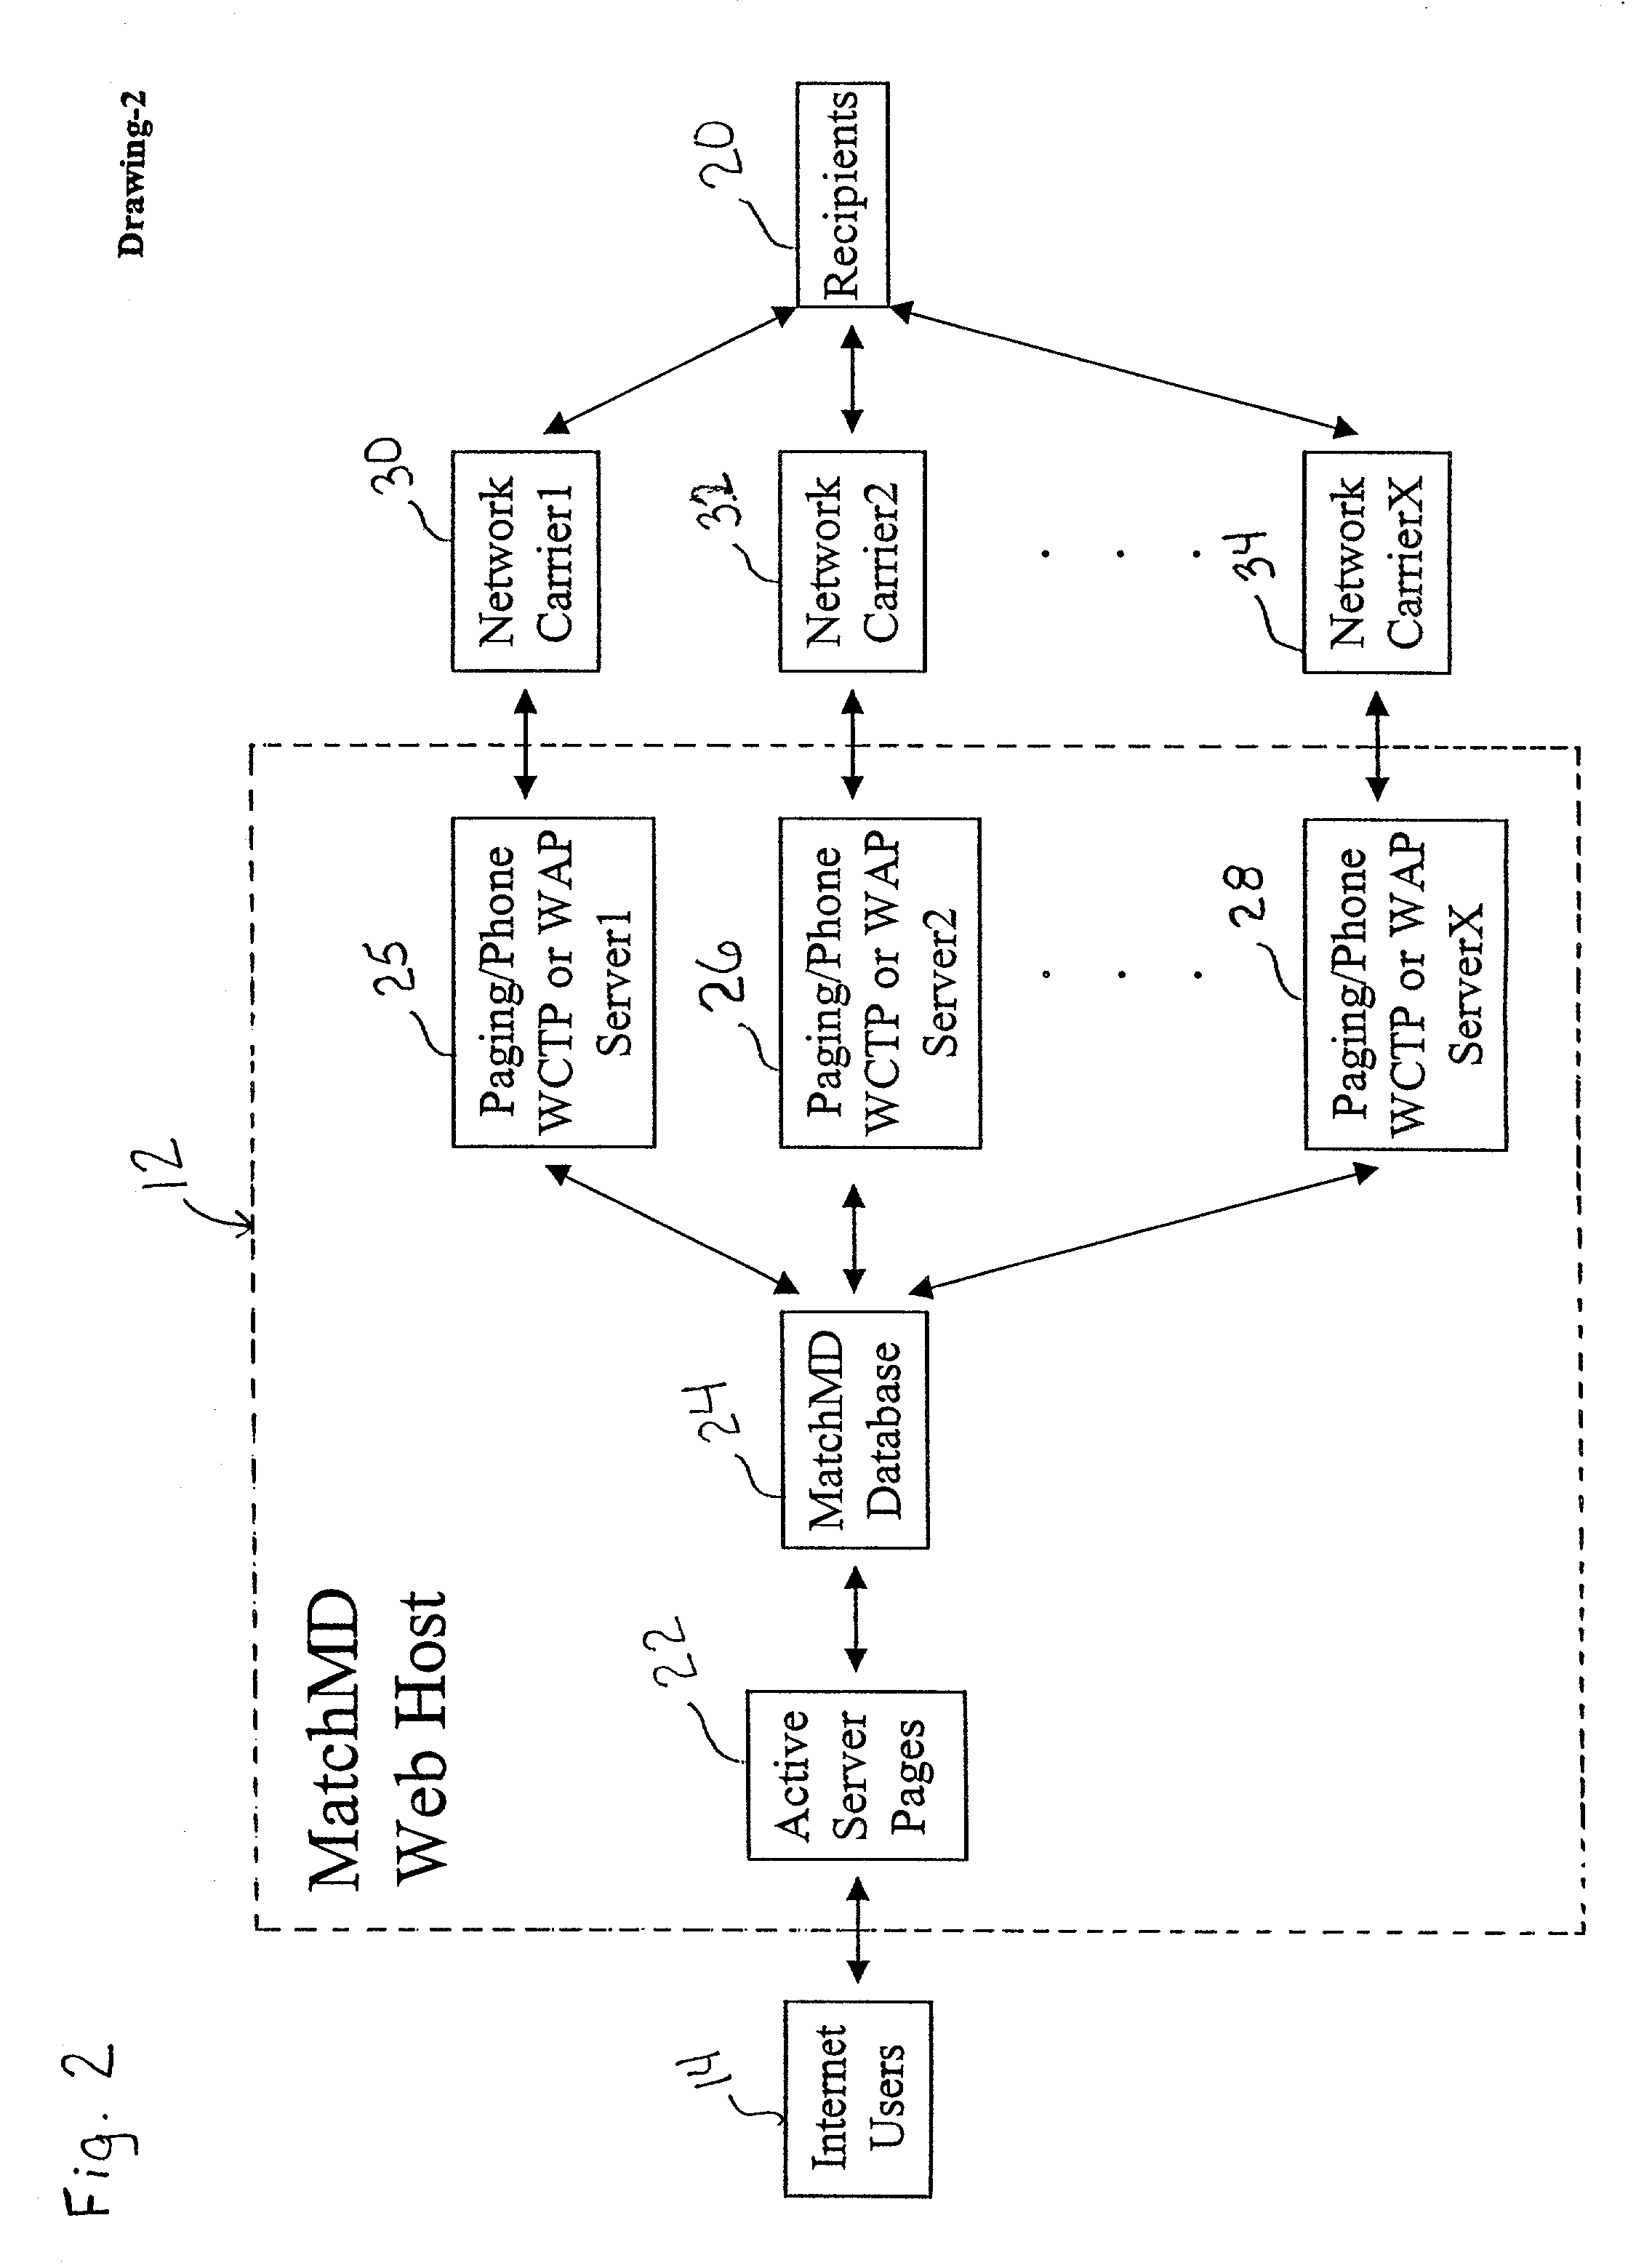 System and method for automated and interactive scheduling